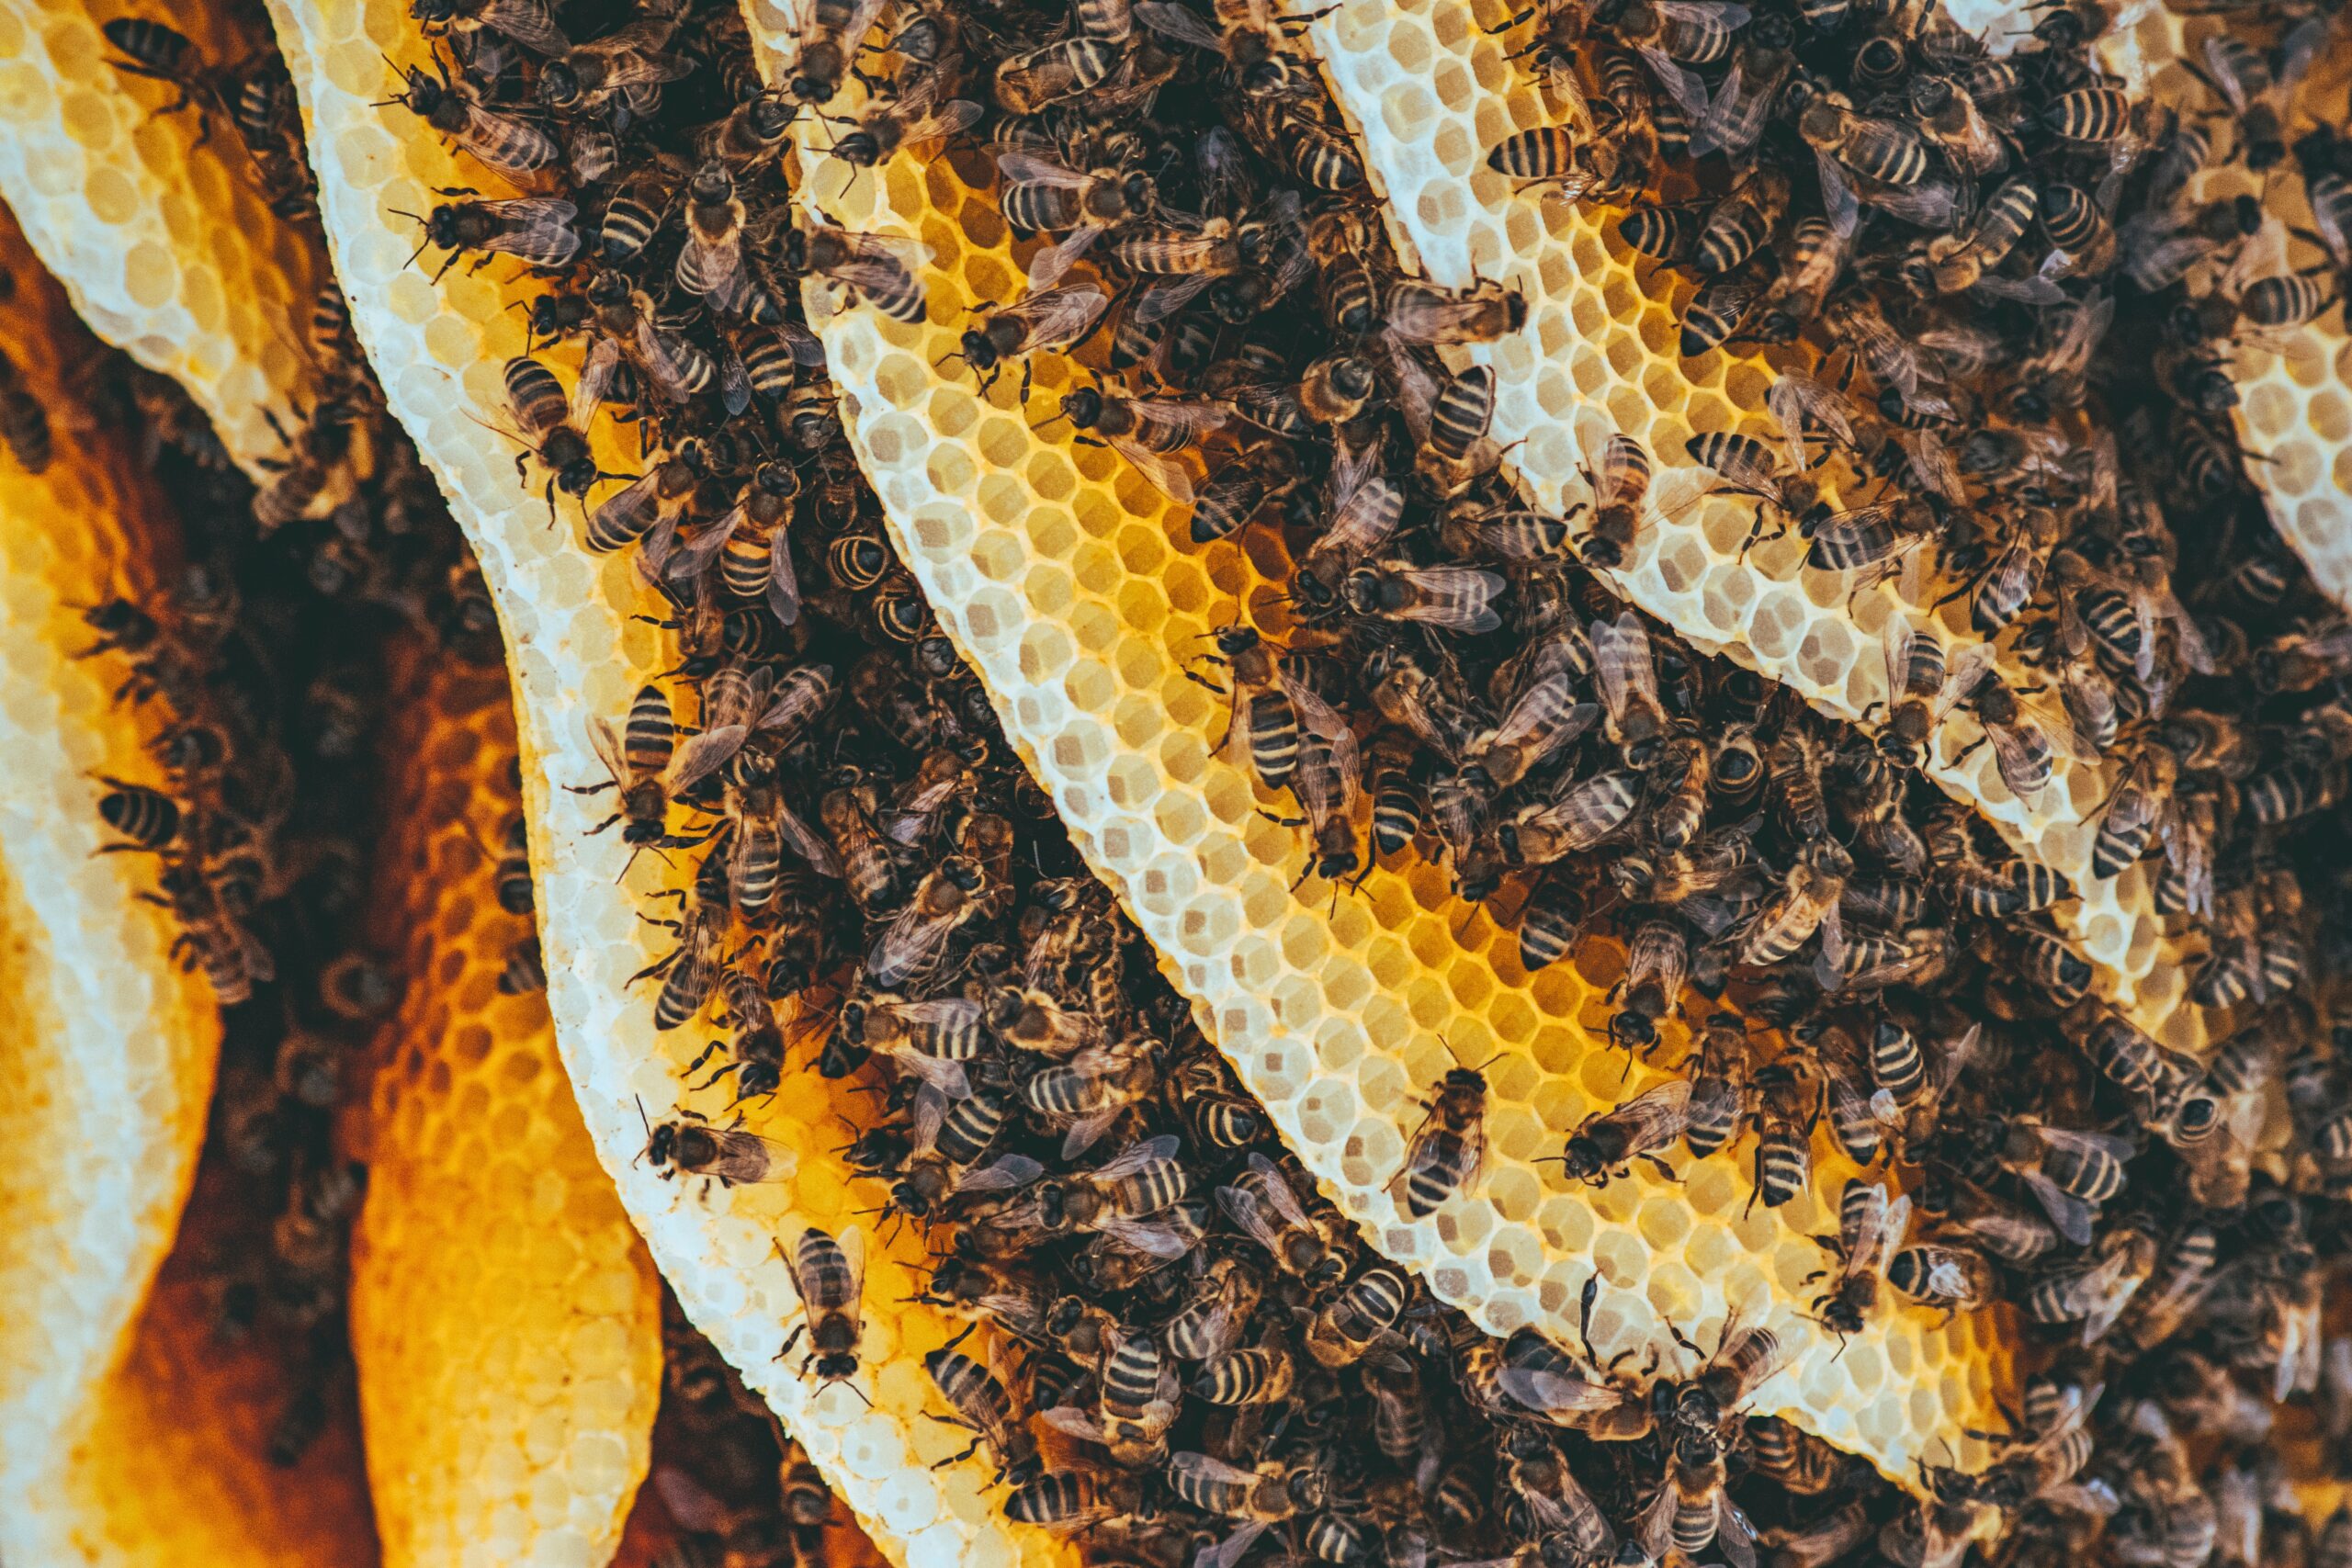 How to Help Save Local Honeybees